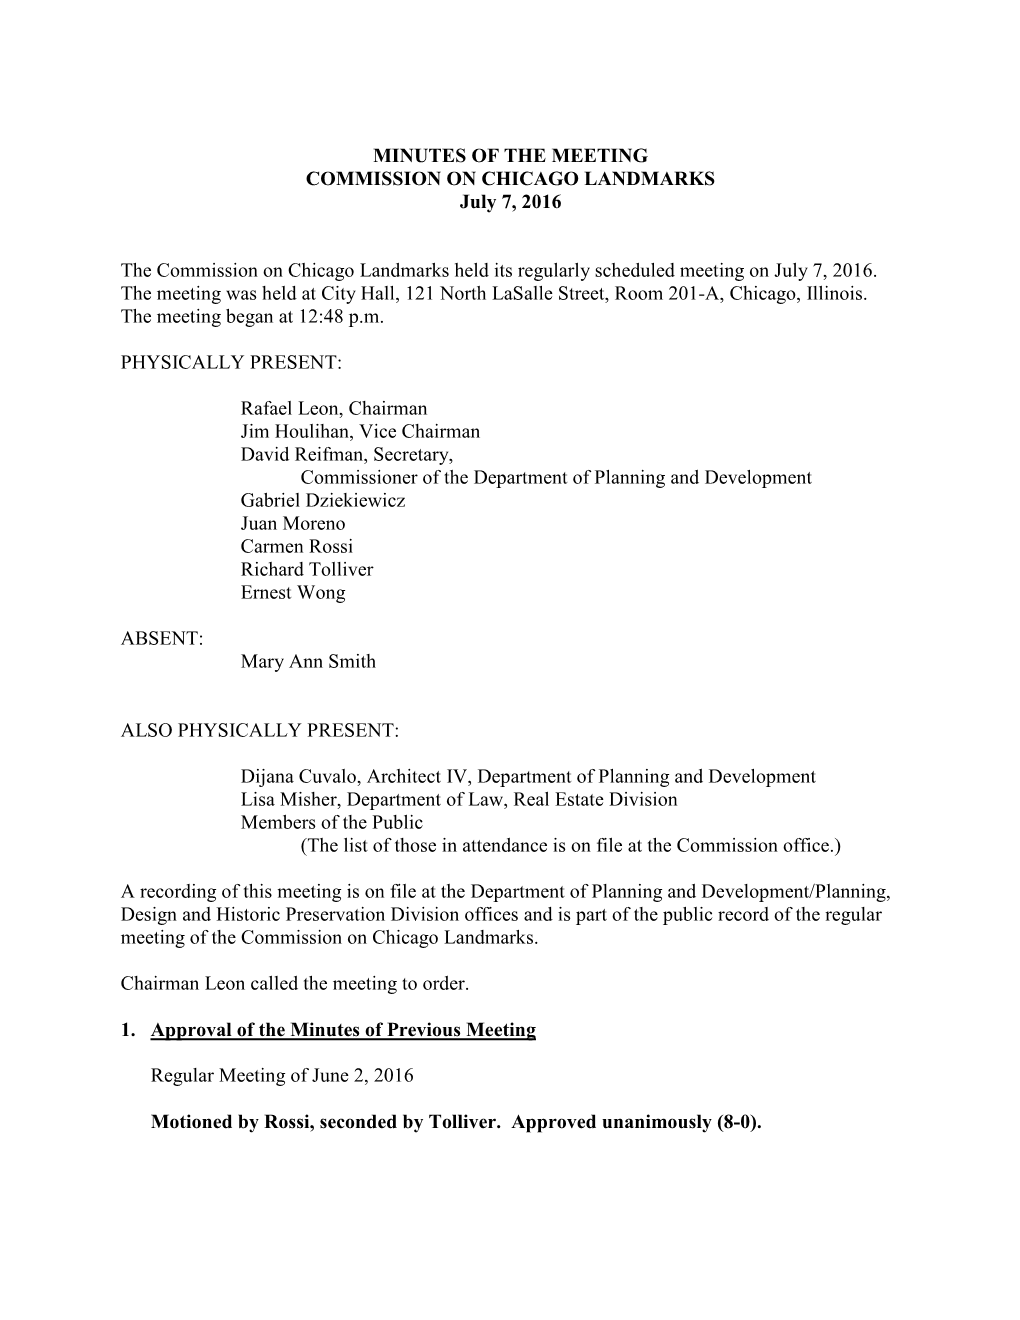 MINUTES of the MEETING COMMISSION on CHICAGO LANDMARKS July 7, 2016